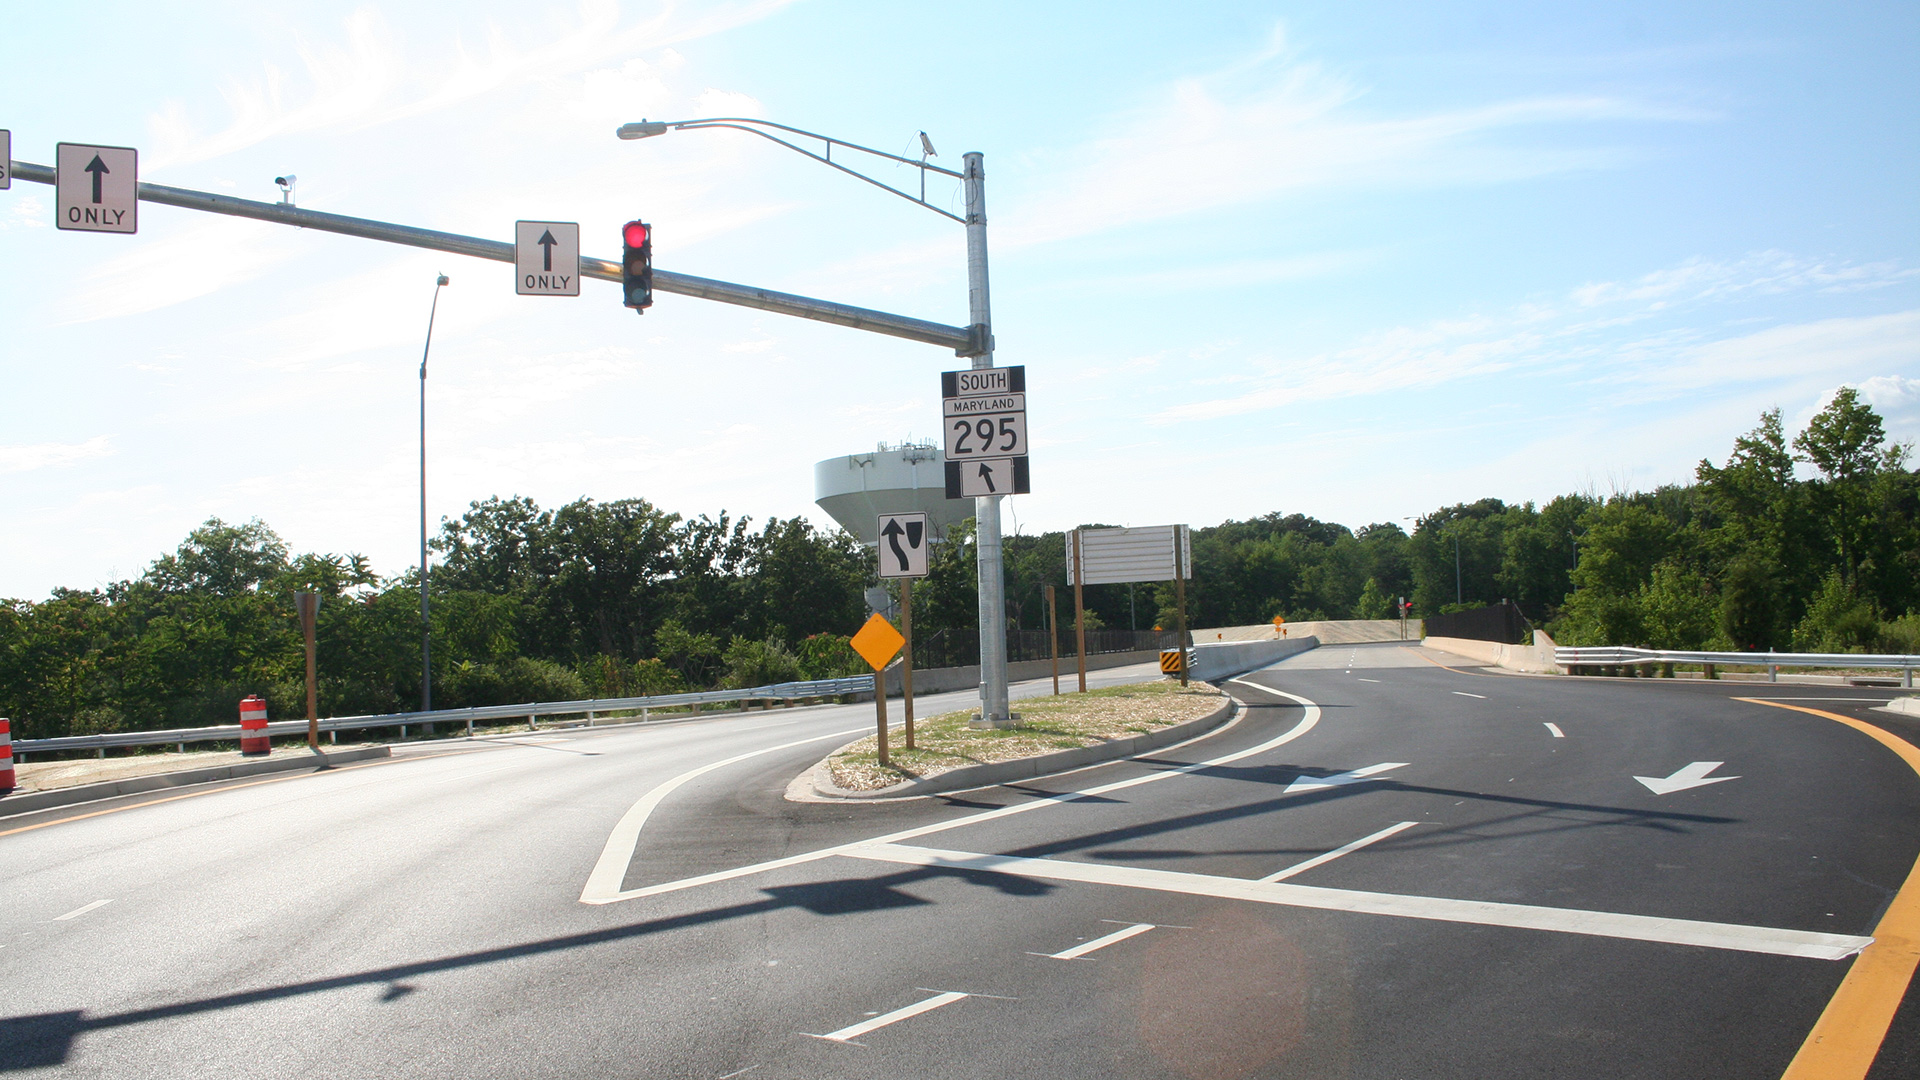 Diverging Diamond Intersection